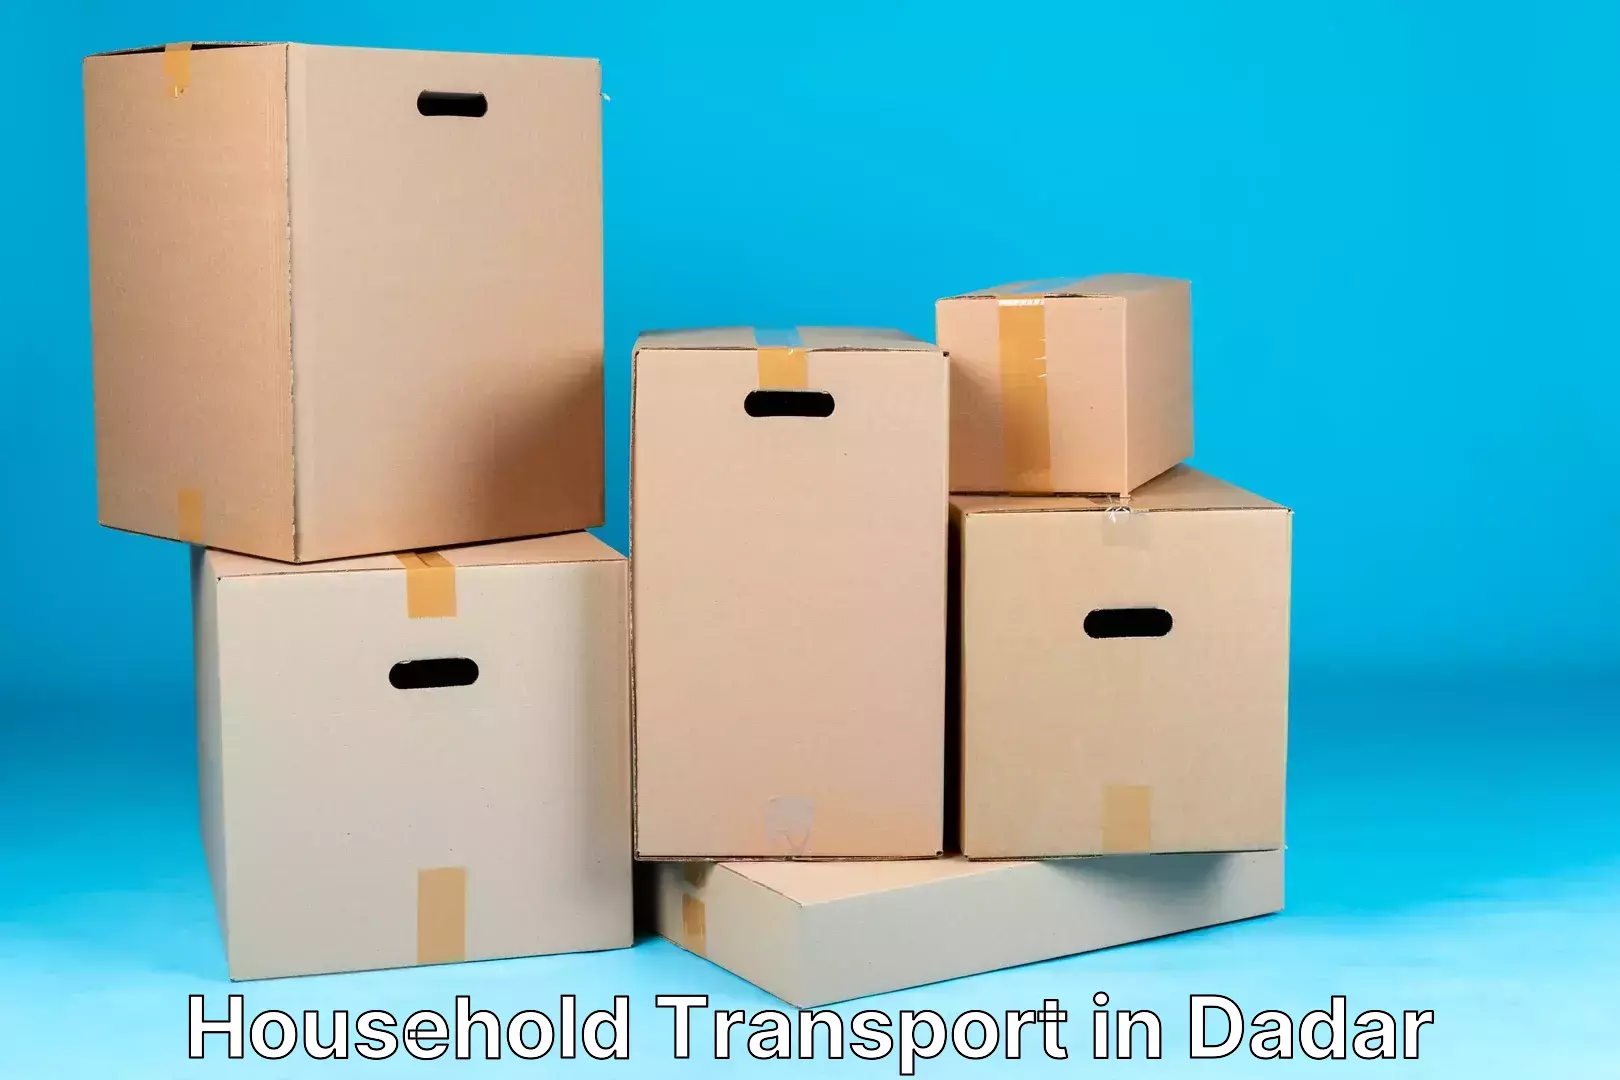 Quality moving and storage in Dadar